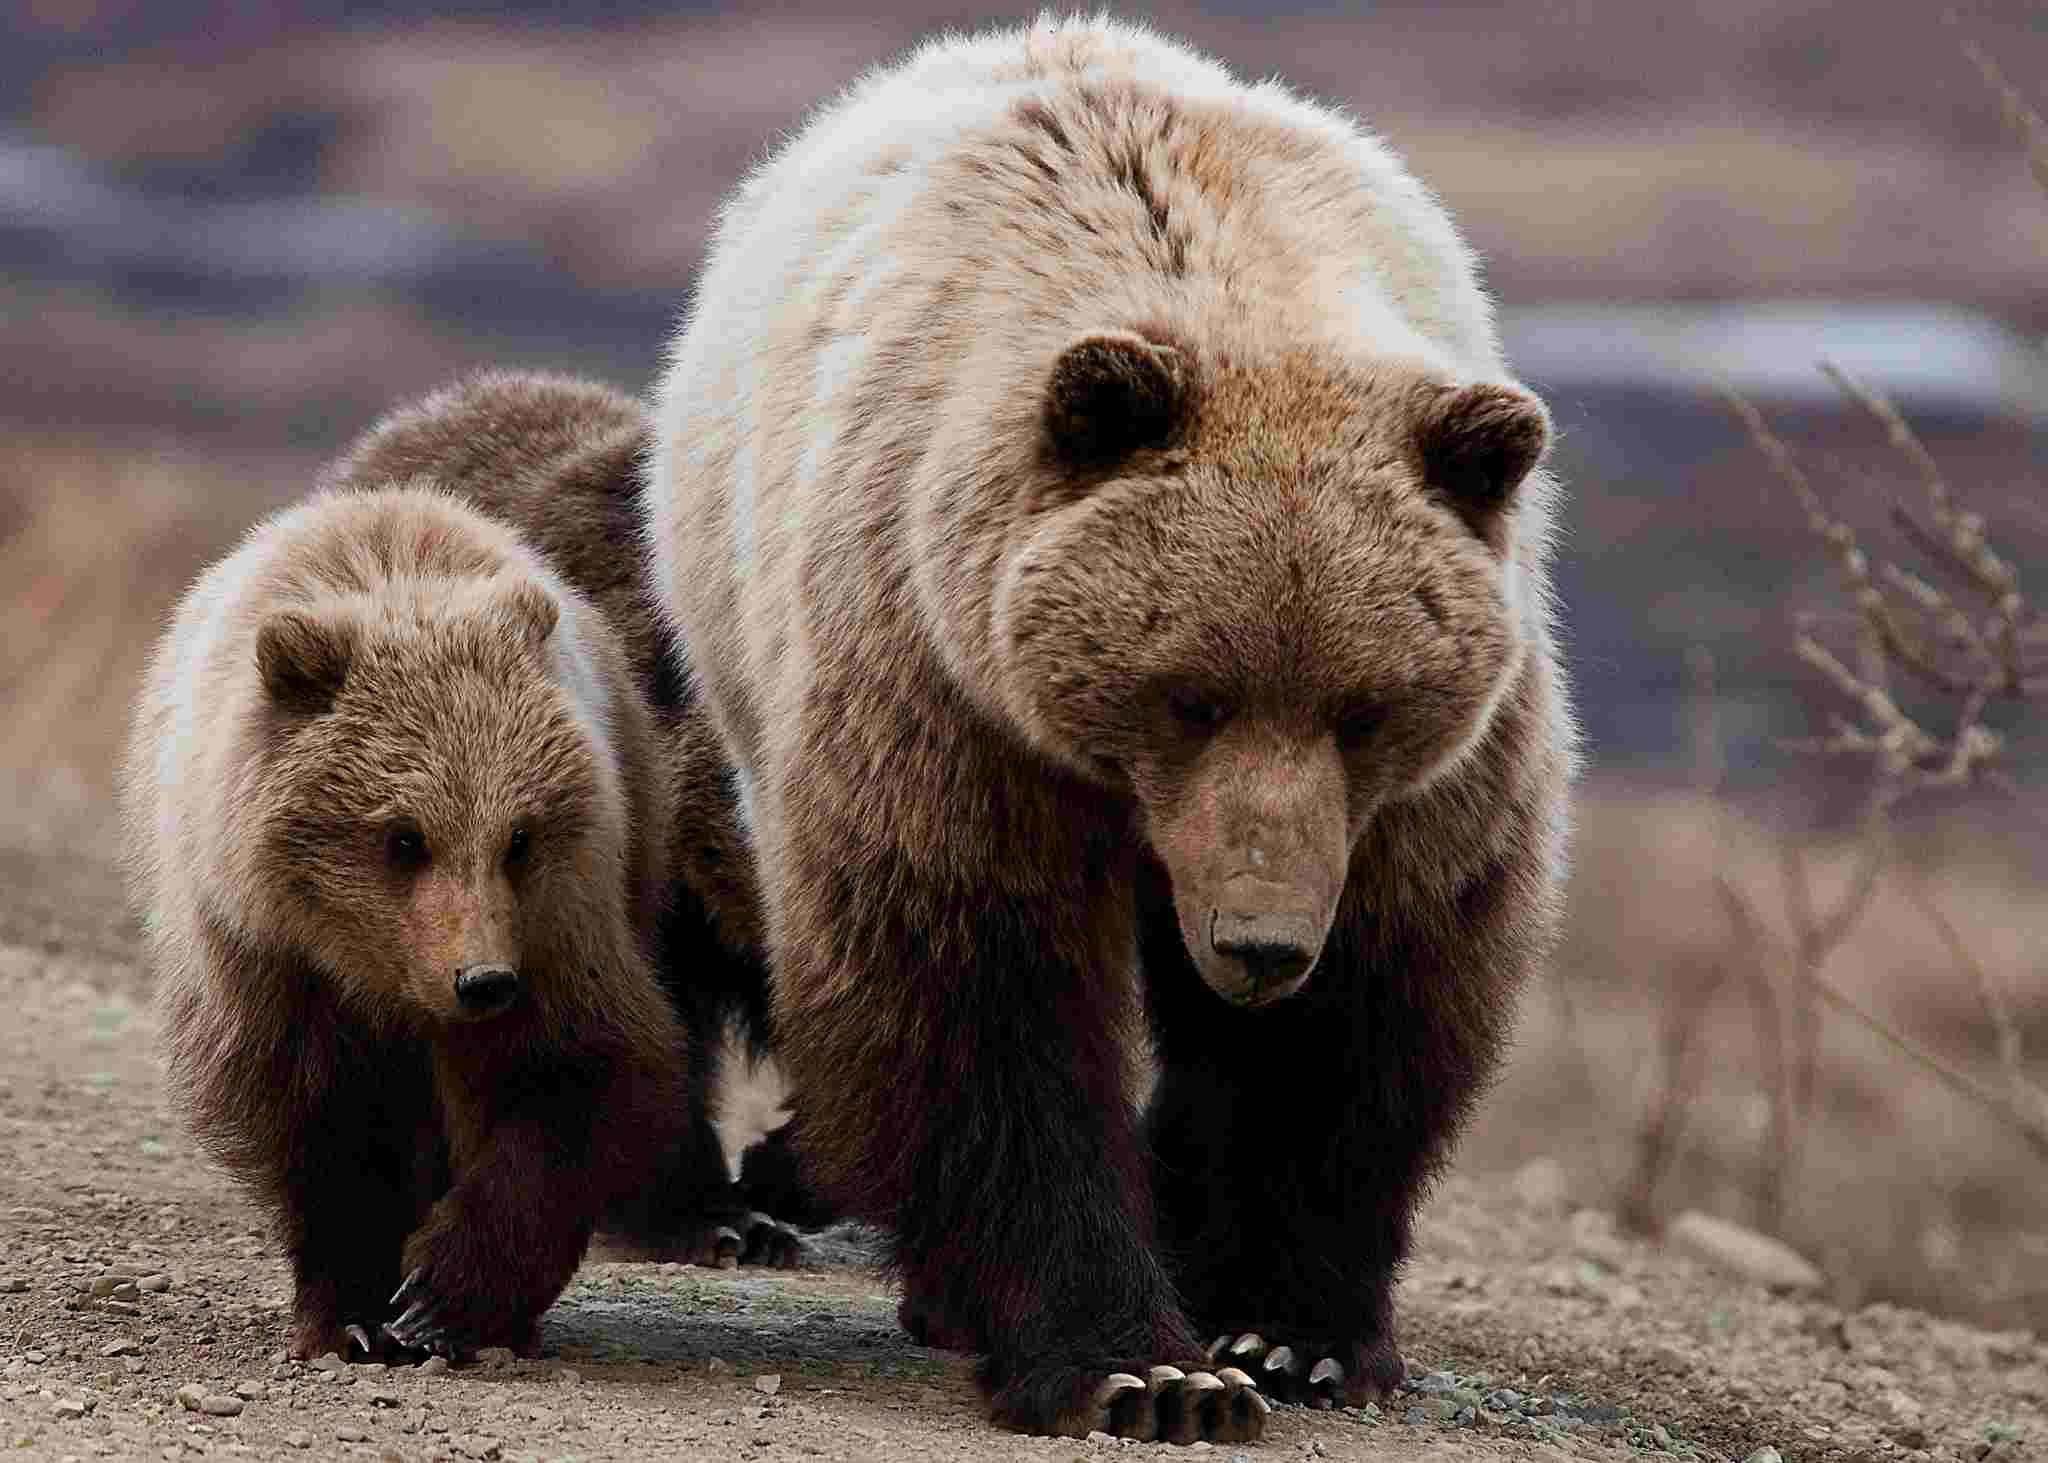 Grizzly Bear Vs Lion: Viviparous Reproduction is an Attribute of Grizzly Bears (Credit: Denali National Park and Preserve 2009, Uploaded Online 2011 .CC BY 2.0.)